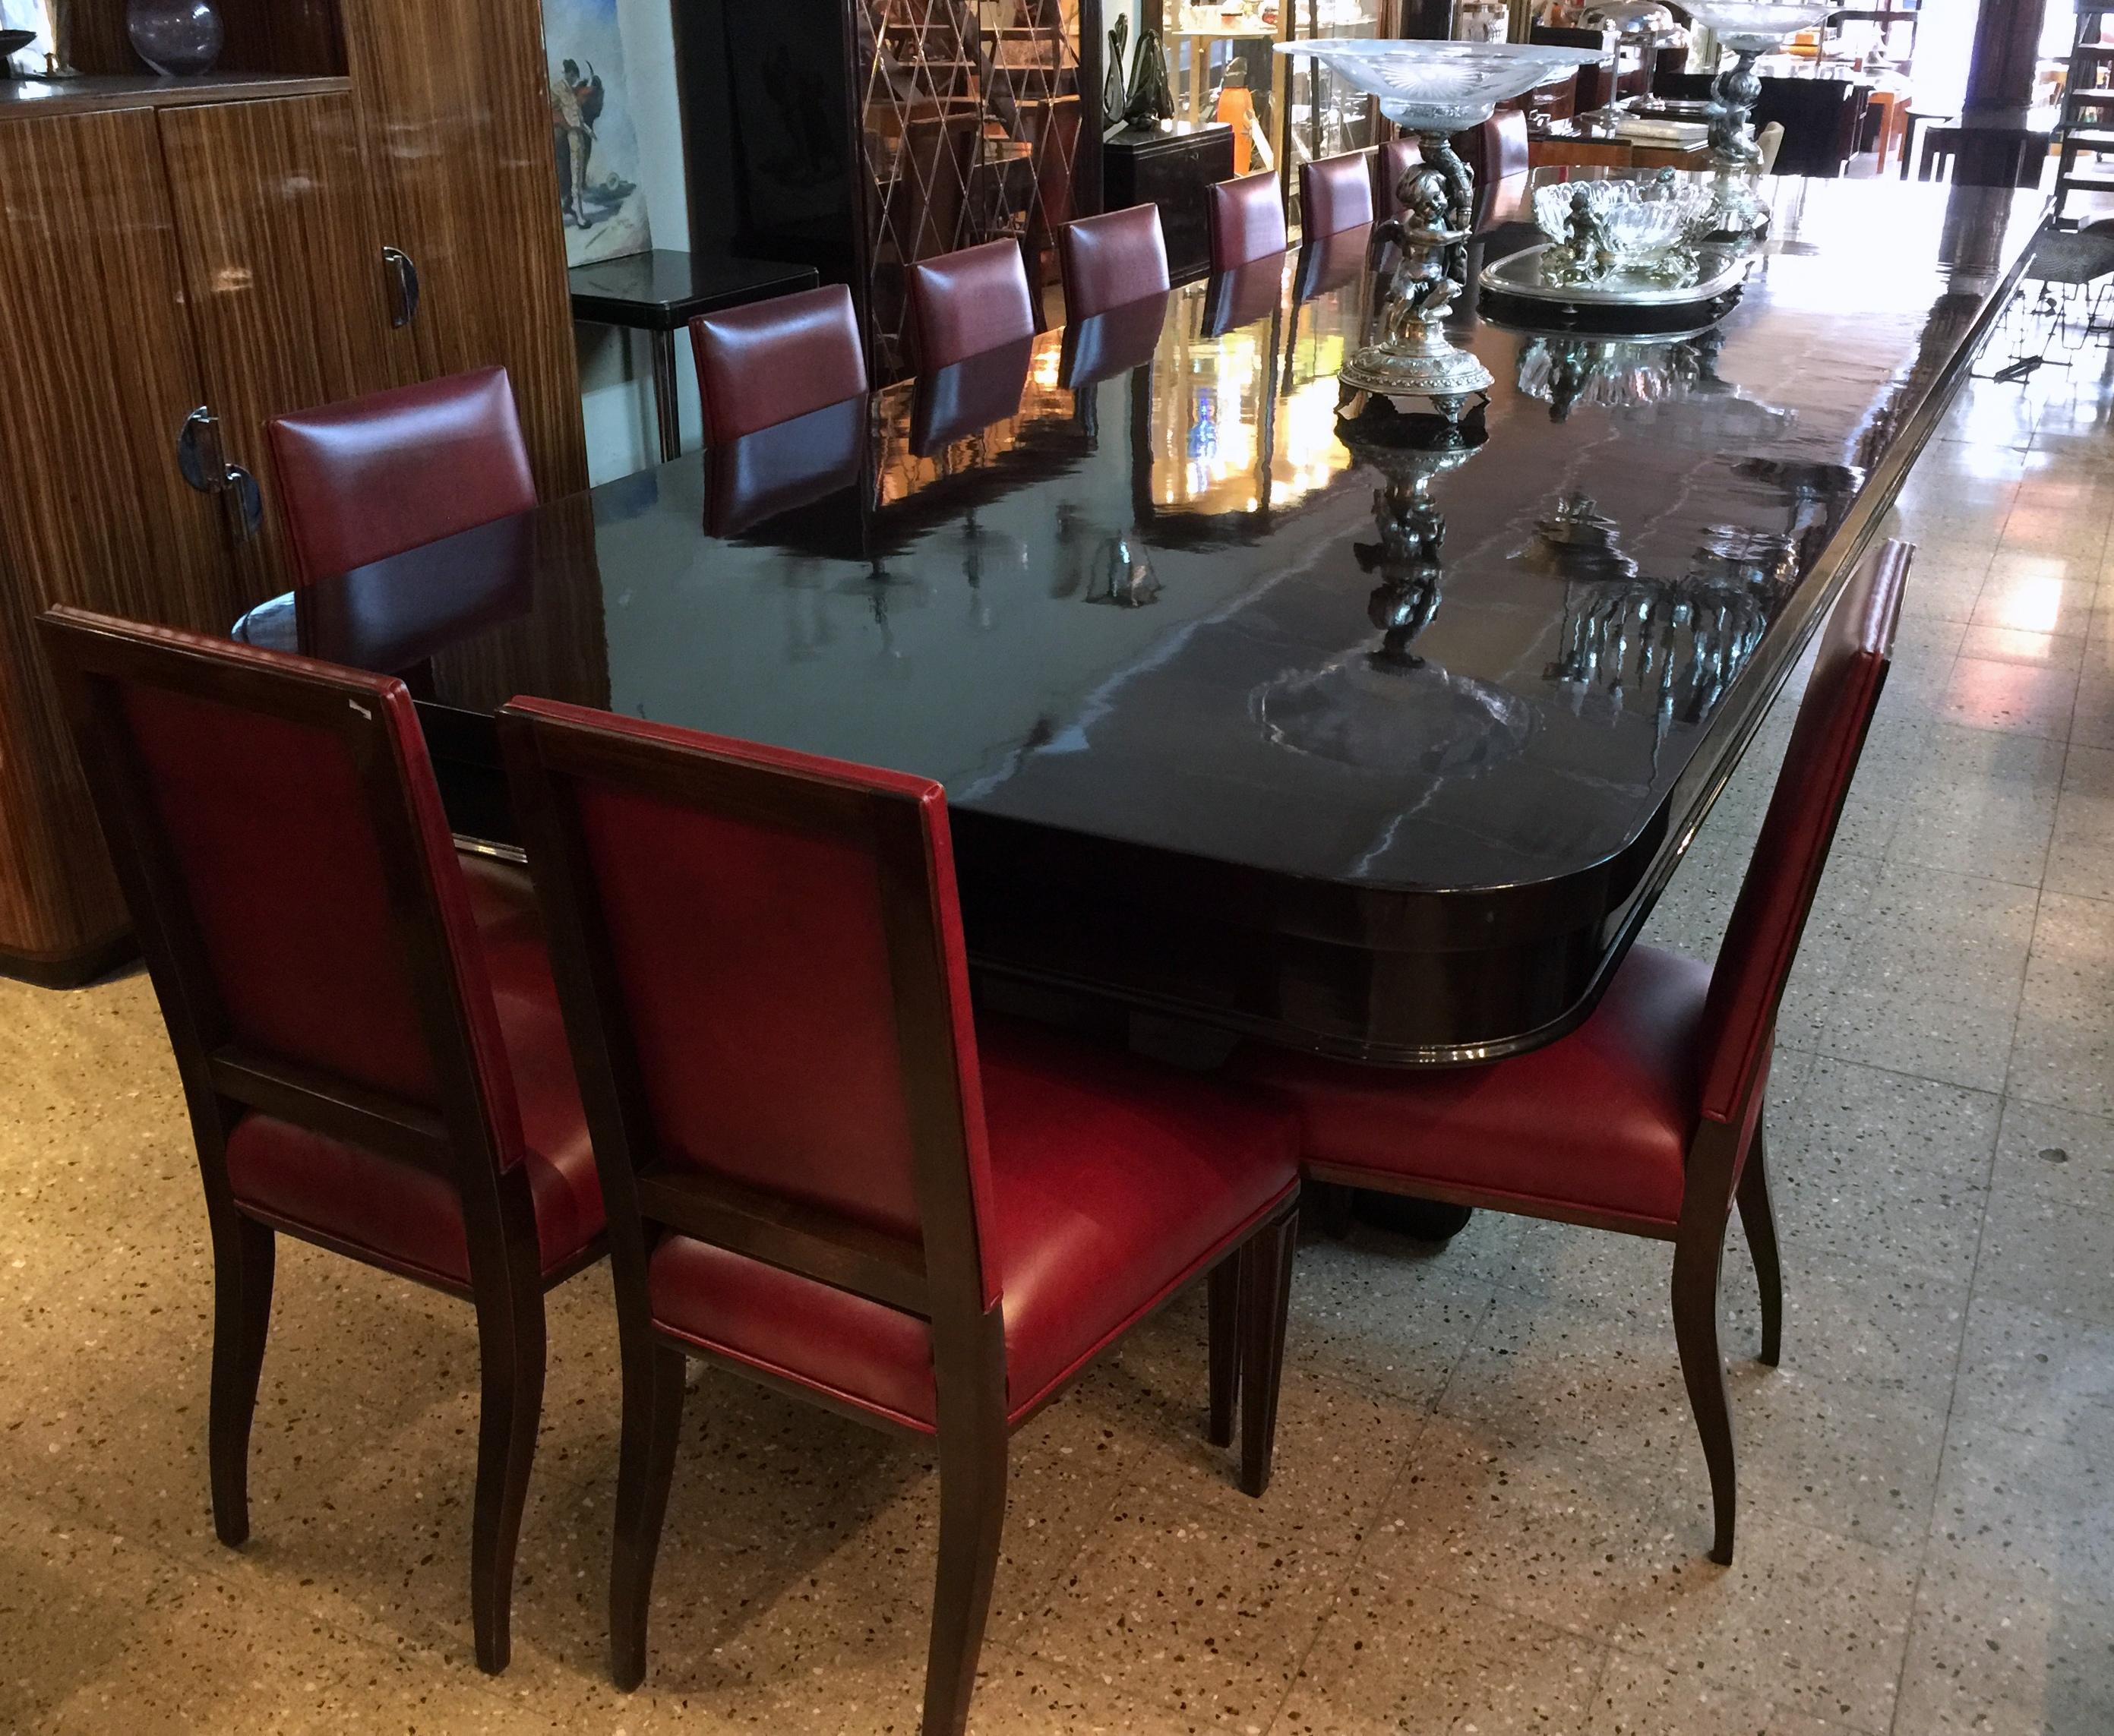 Table is Style Art Deco
Year 1930
French.
Wood is walnut root.
Finish: polyurethanic lacquer.
The top of the table is one piece of depth: 551 cm is amazing. 
In the table you can sit: 12 people very comfortable or 24 People is extraordinary and